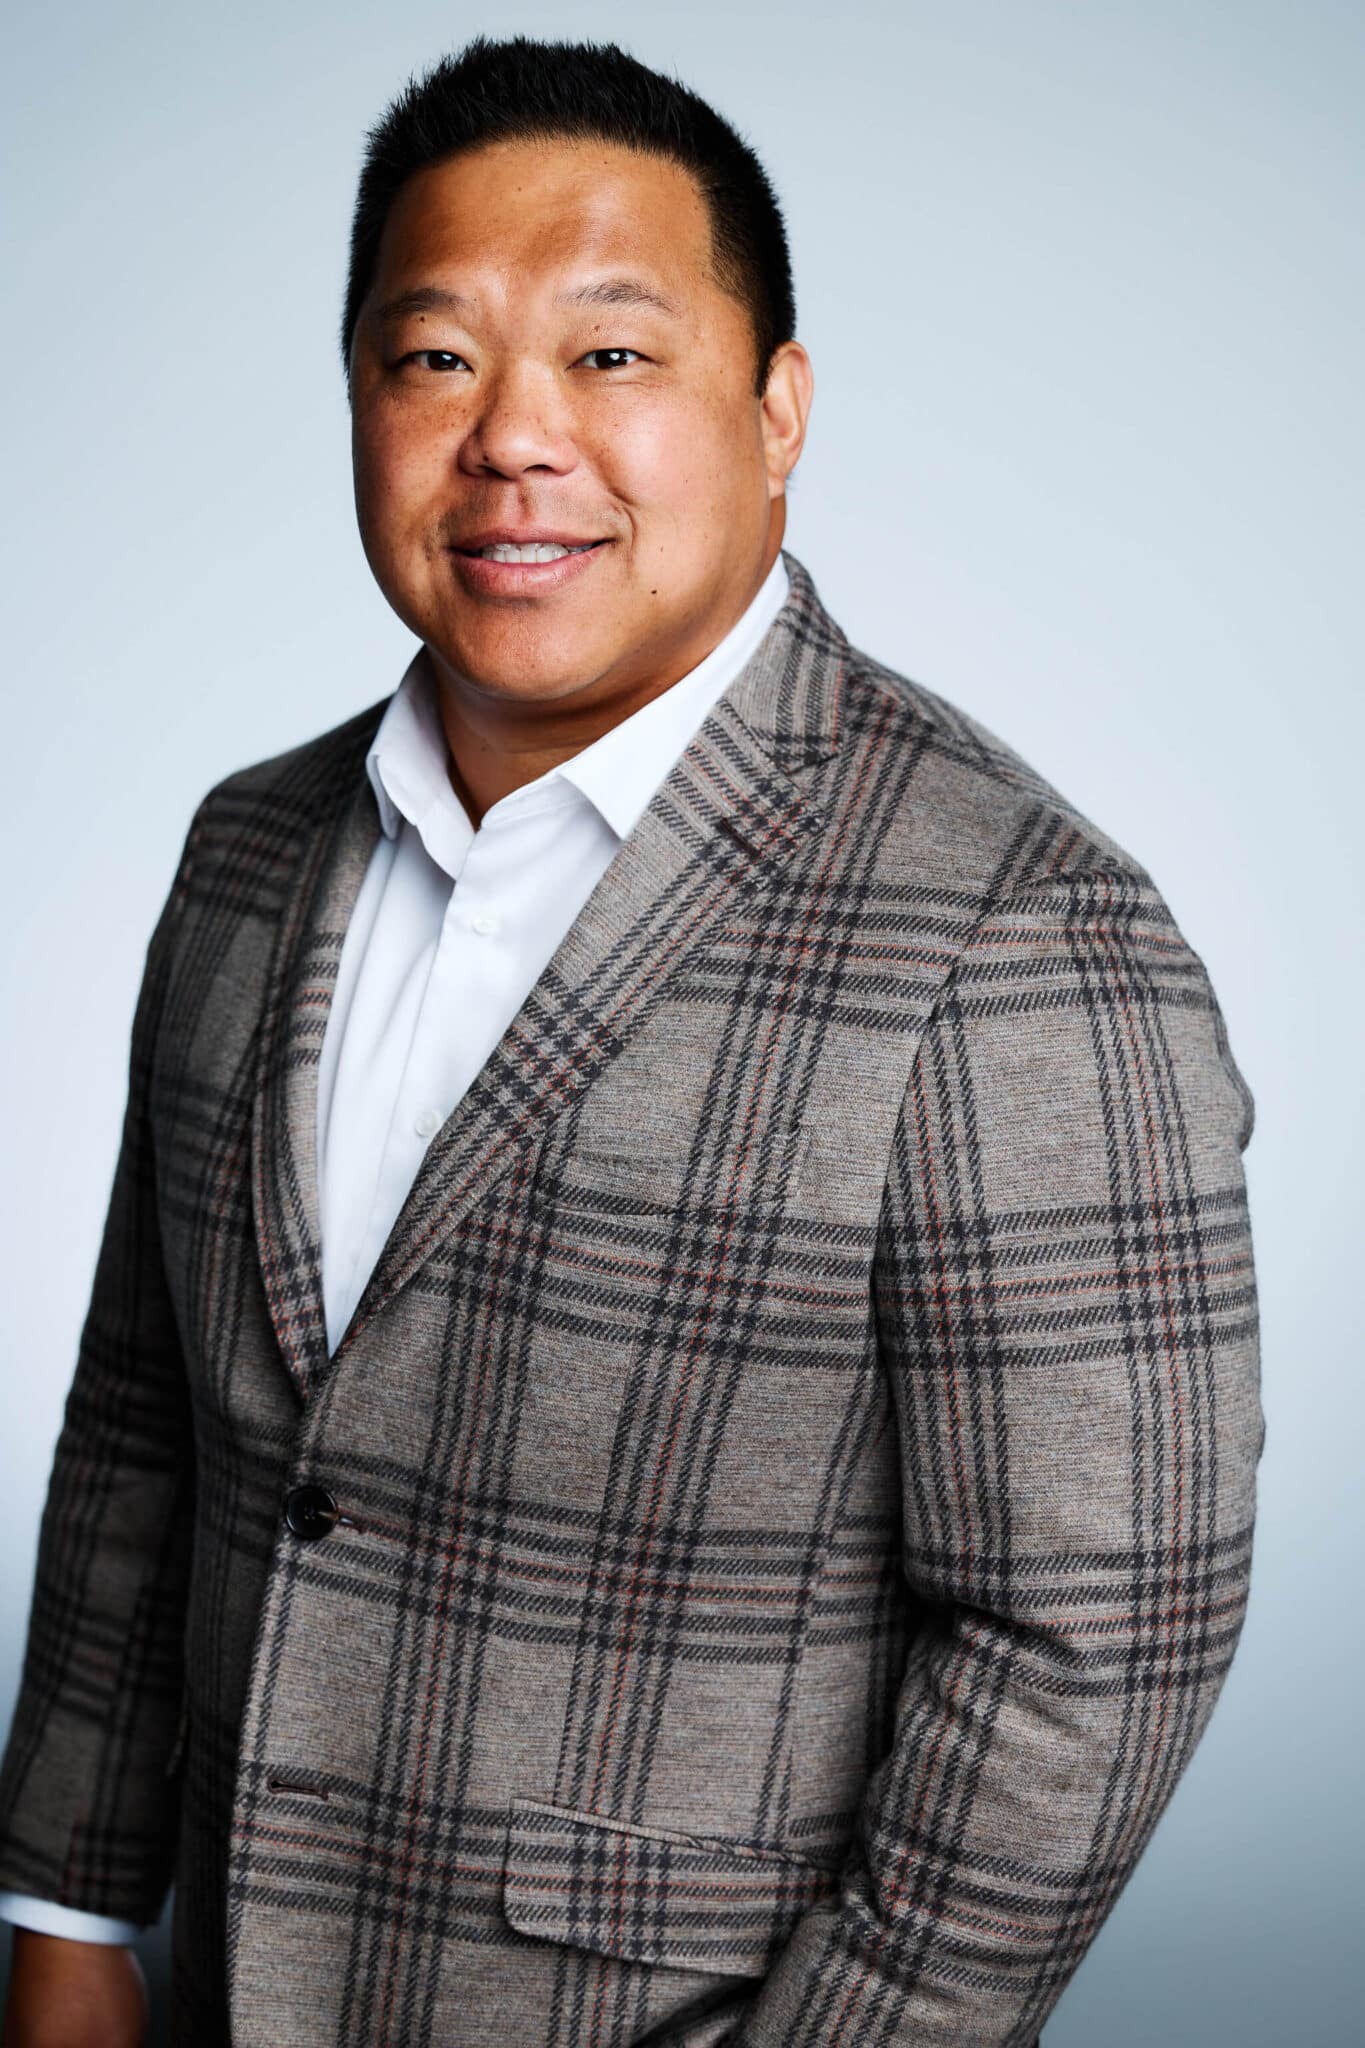 Doug Ding has been hired as VP of Operations at OTAVA.